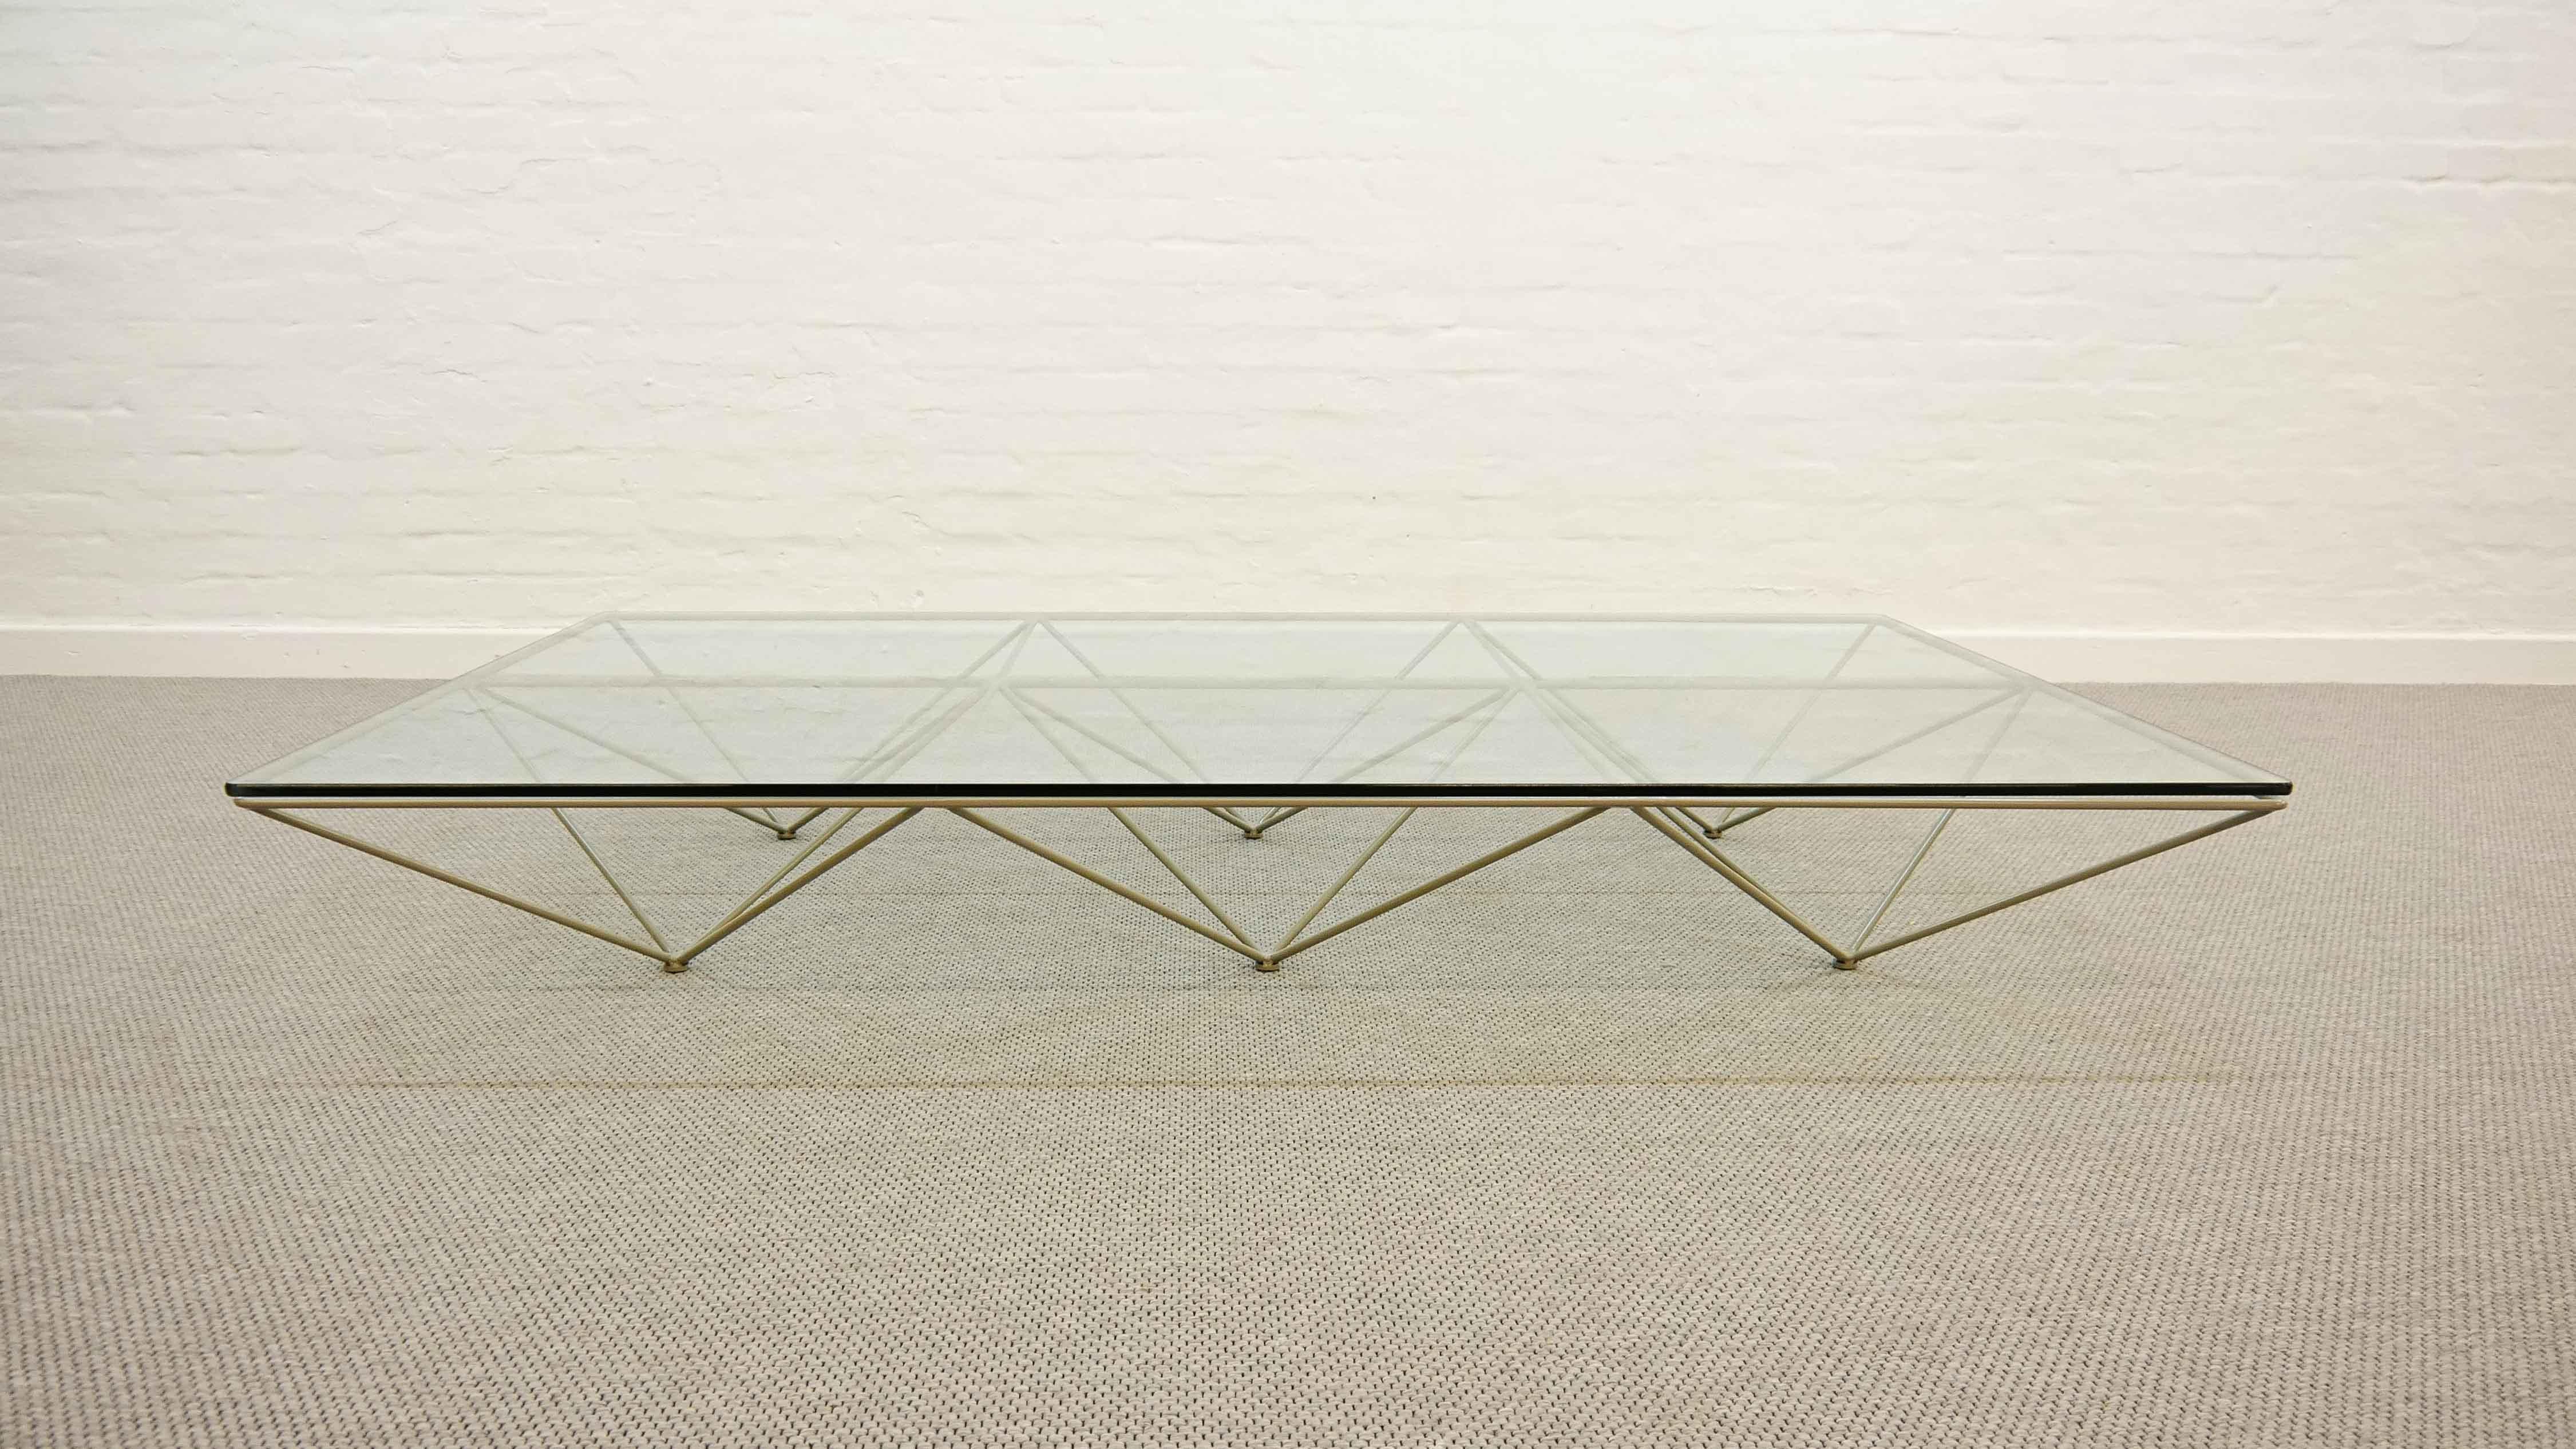 Mid-century coffee table / sofa table Alanda by Paolo Piva 1982 for B&B Italia in large Version. The design of the table is architectural and constructivistic, but minimalistic in its appearance. The glass tabletop with rounded edges sits upon a